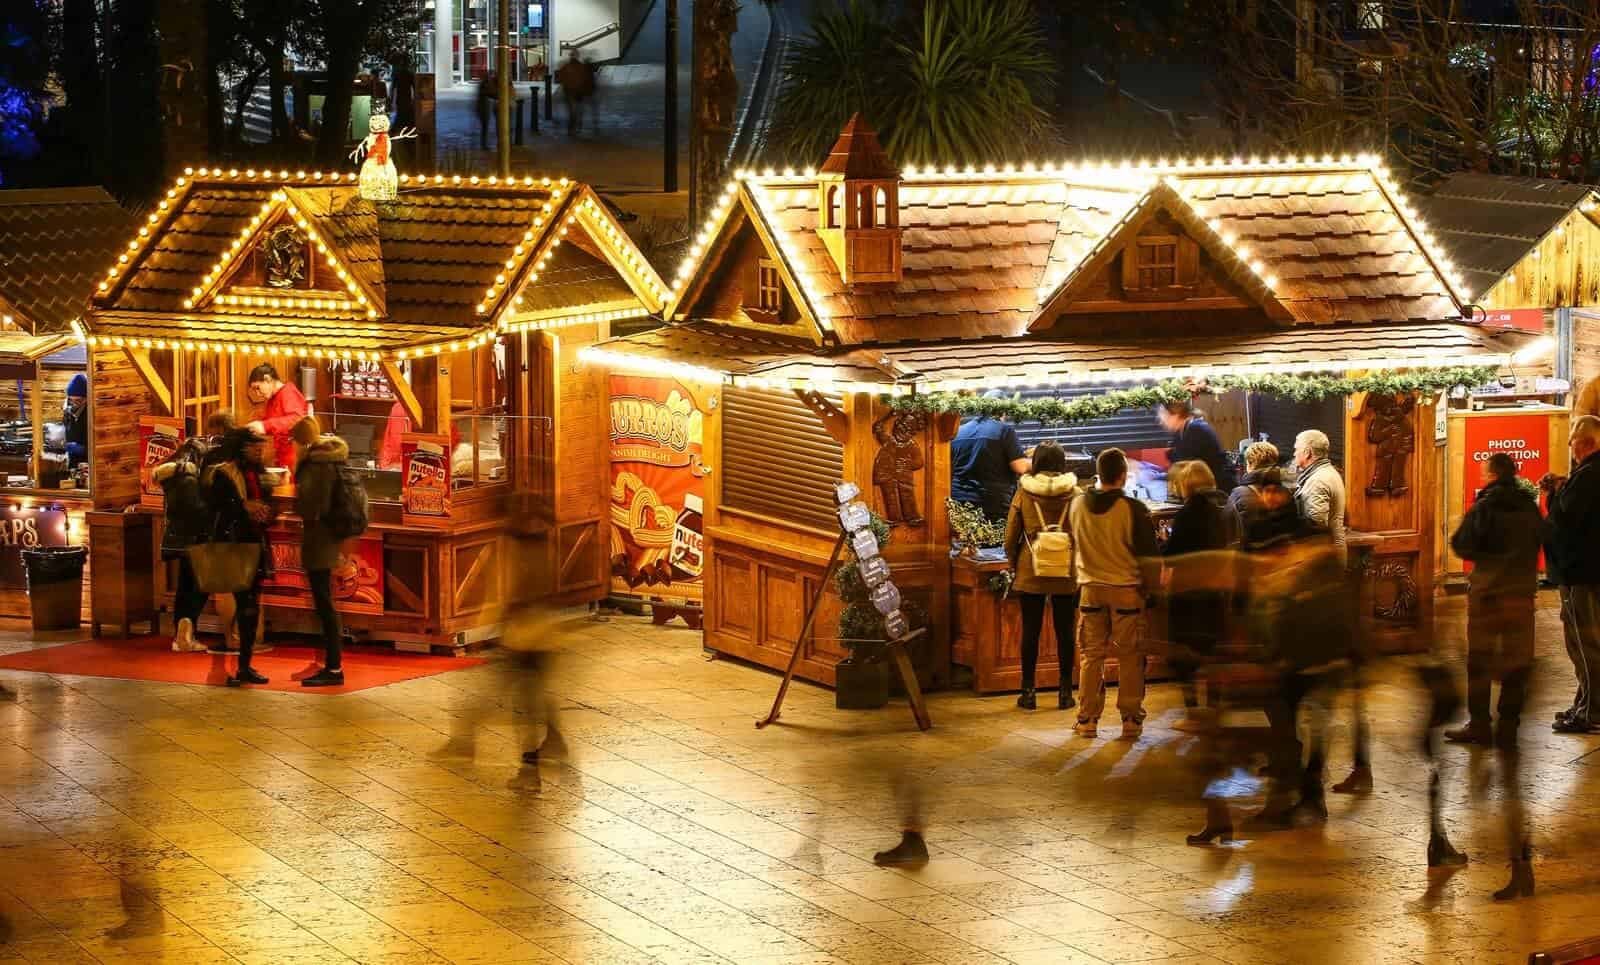 Burnbake and Bournemouth – the perfect Christmas combination